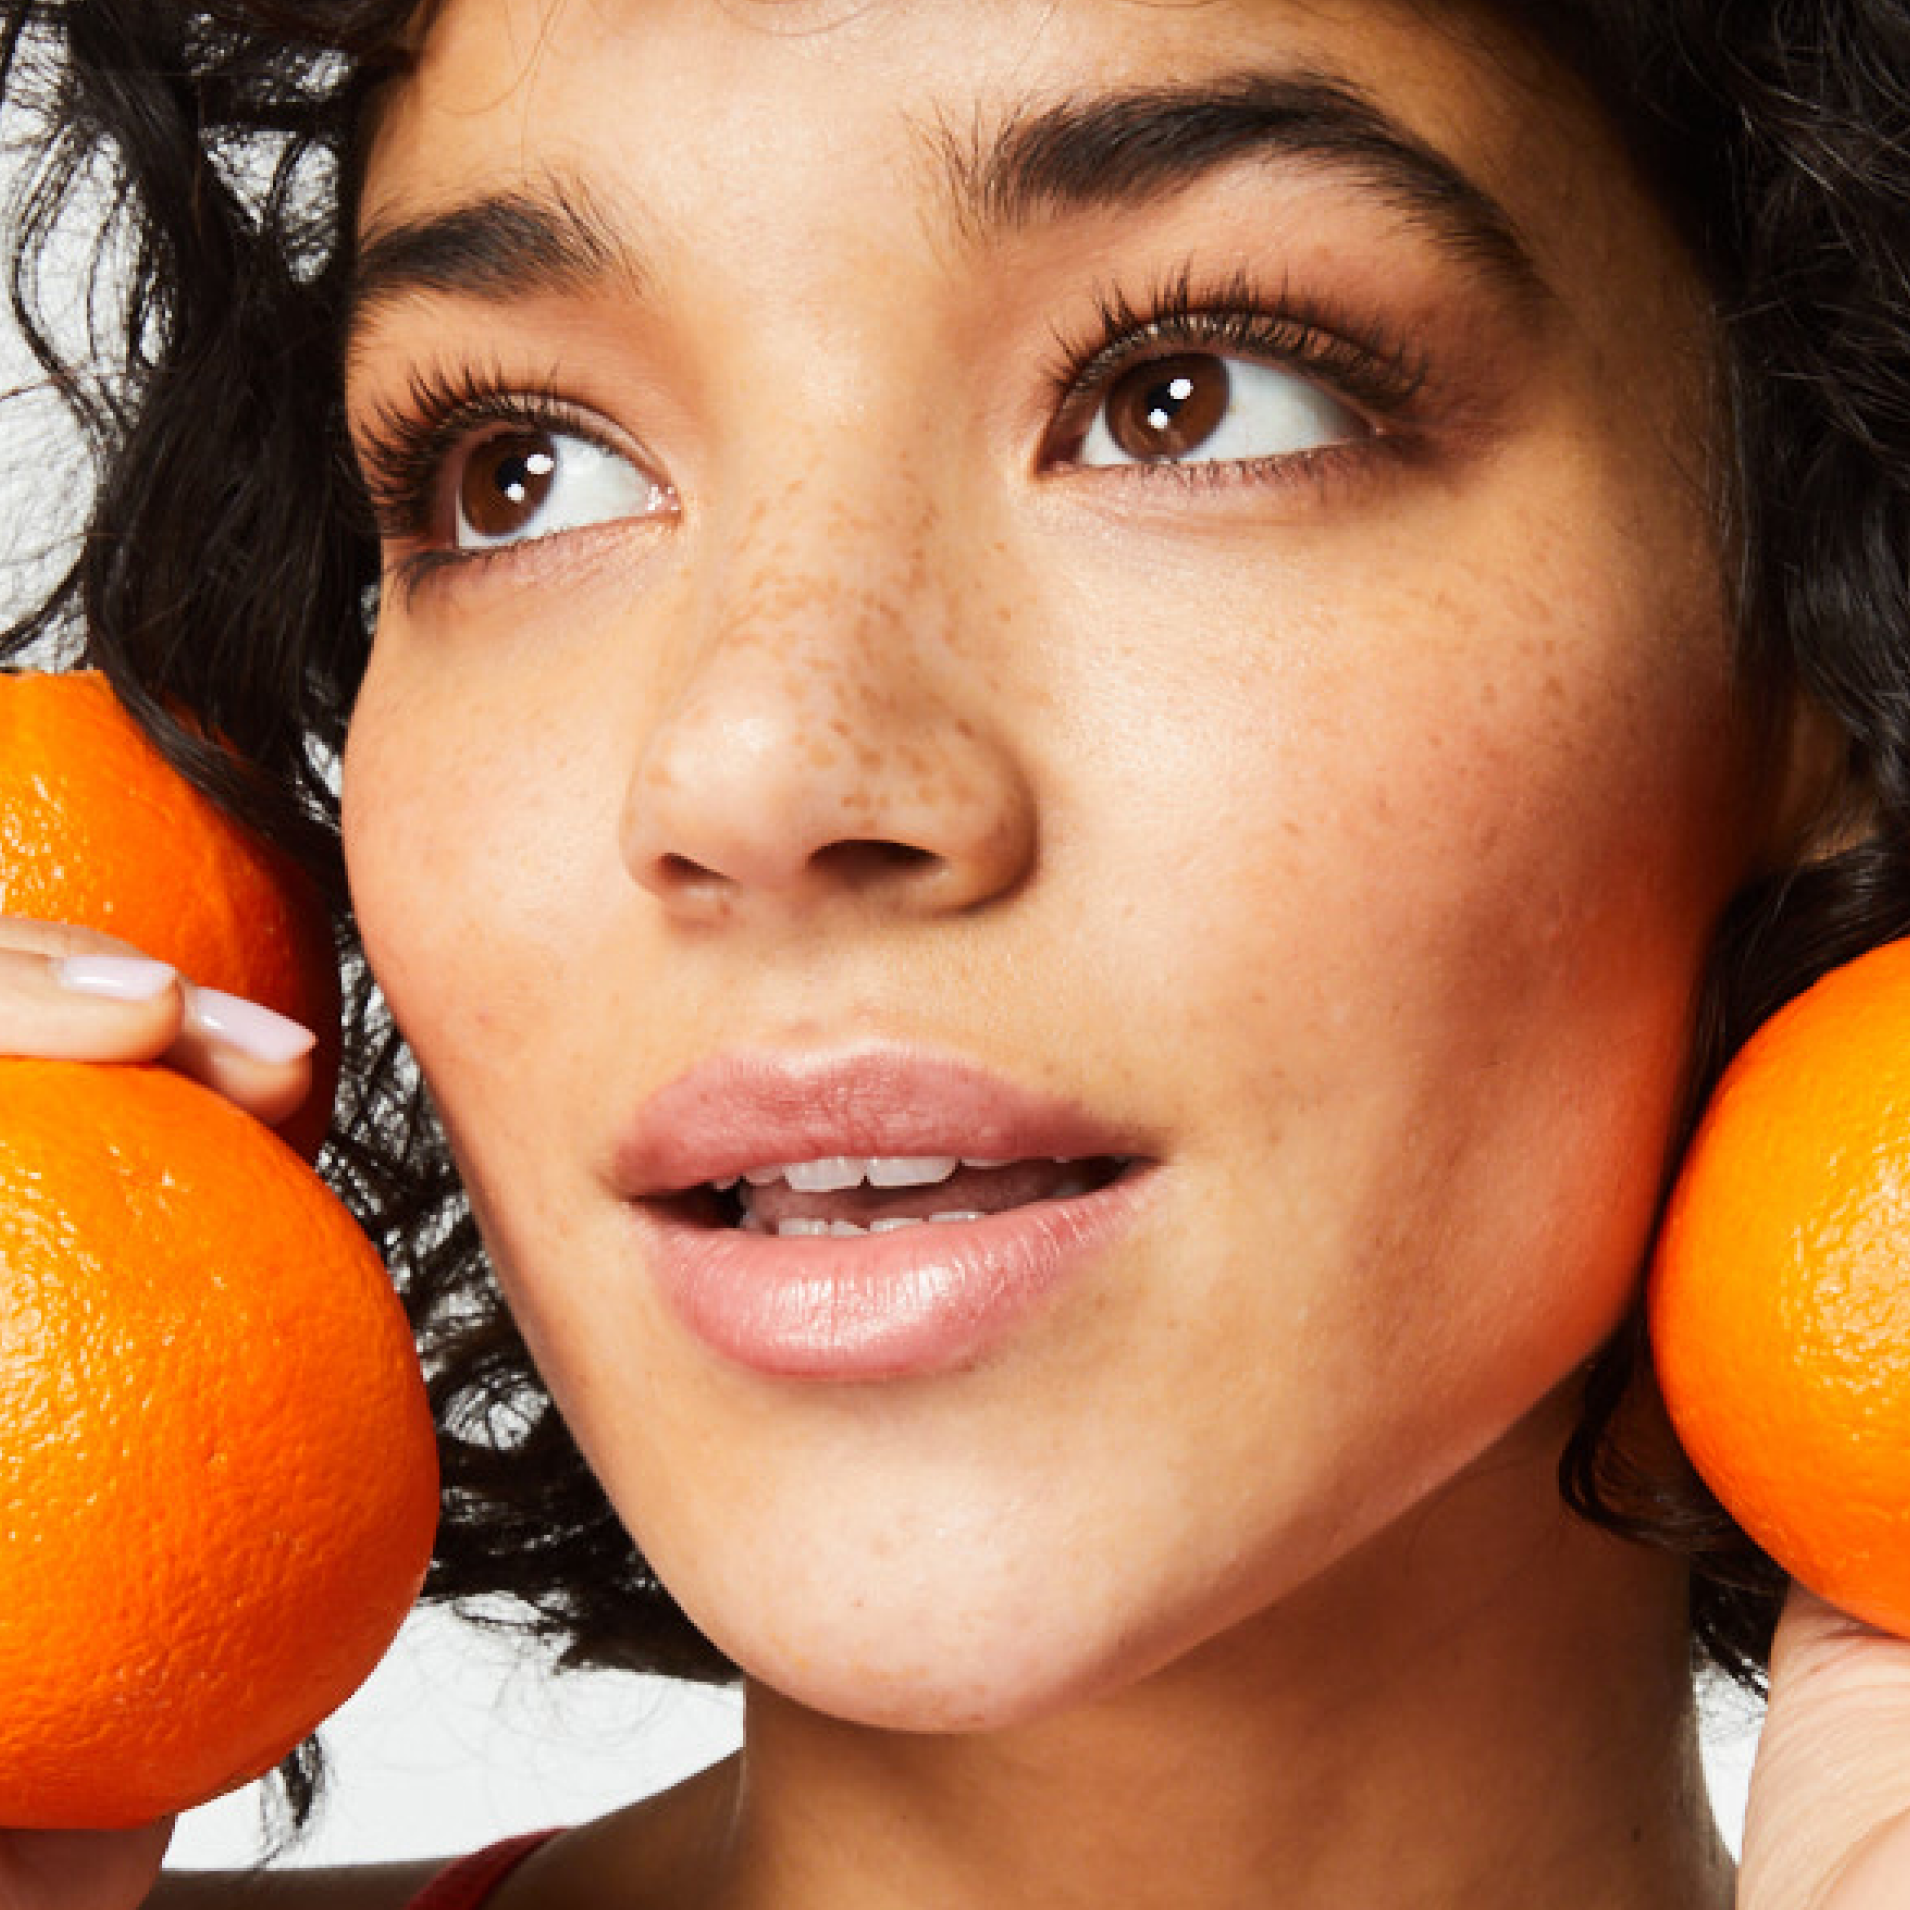 The woman's face with clear skin after using The Face Shop skin care products. The woman is holding oranges next to her face demonstrating the effects of the Vitamin C.